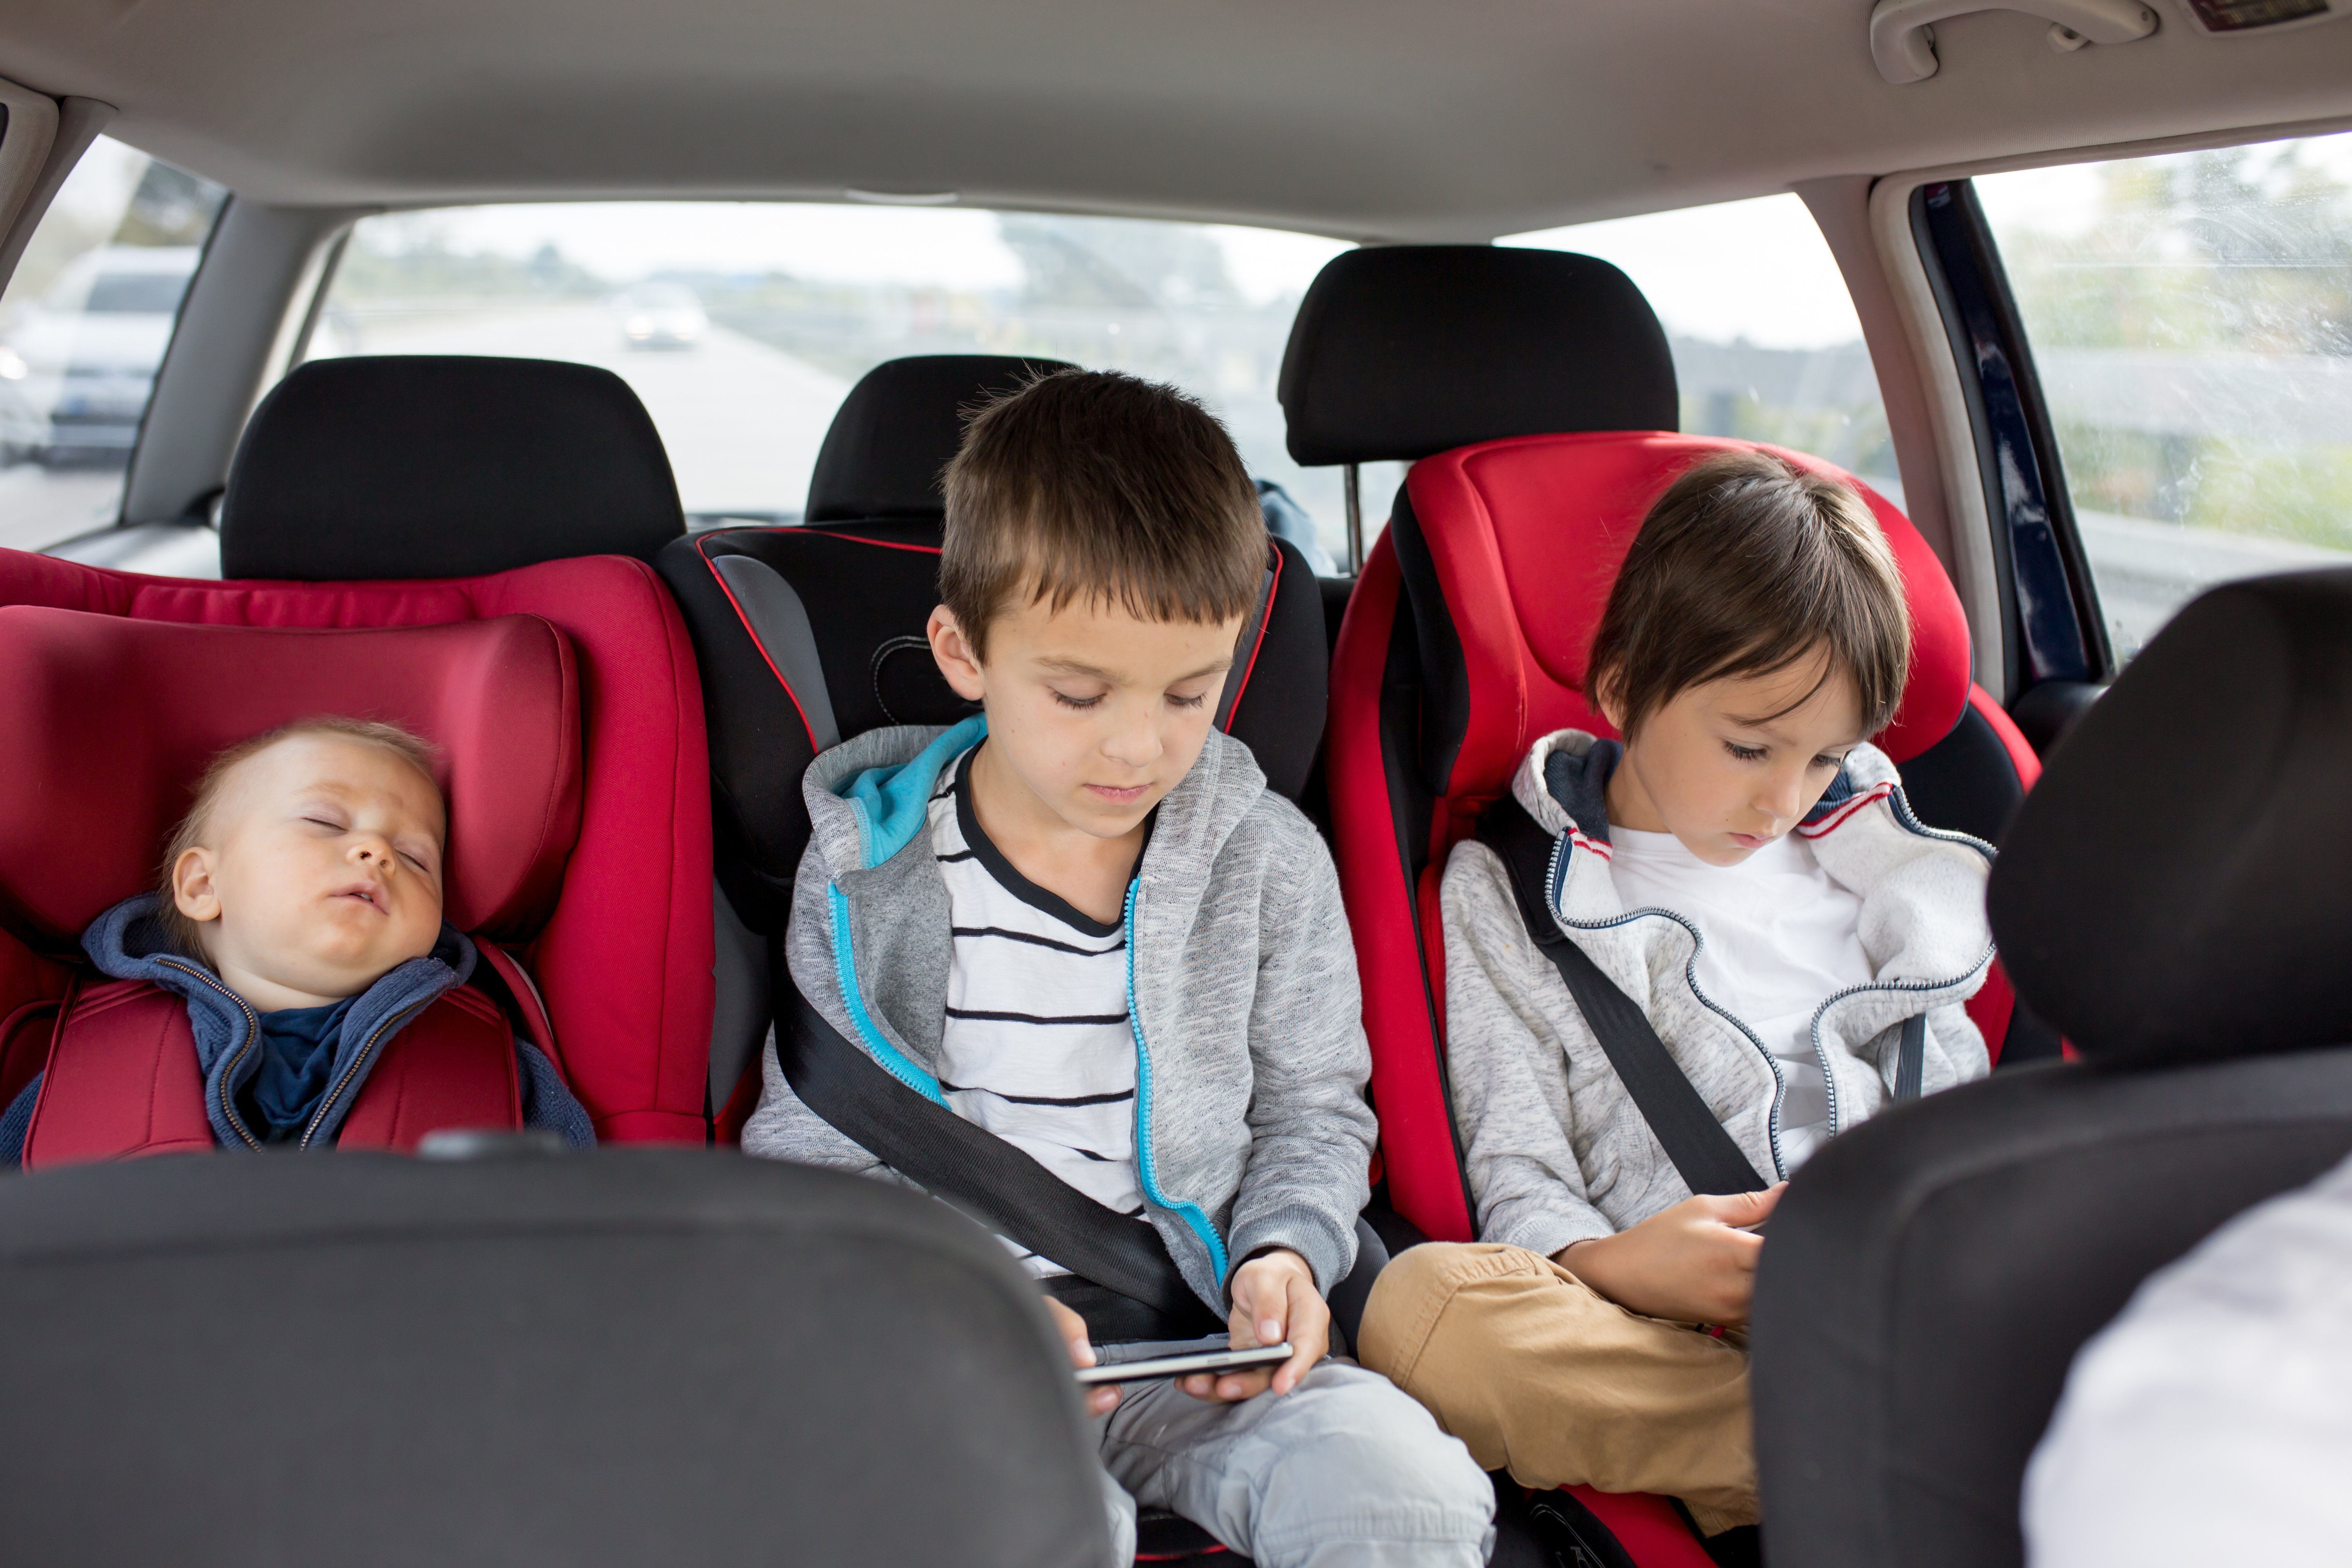 in cabin sensing for the family vehicle